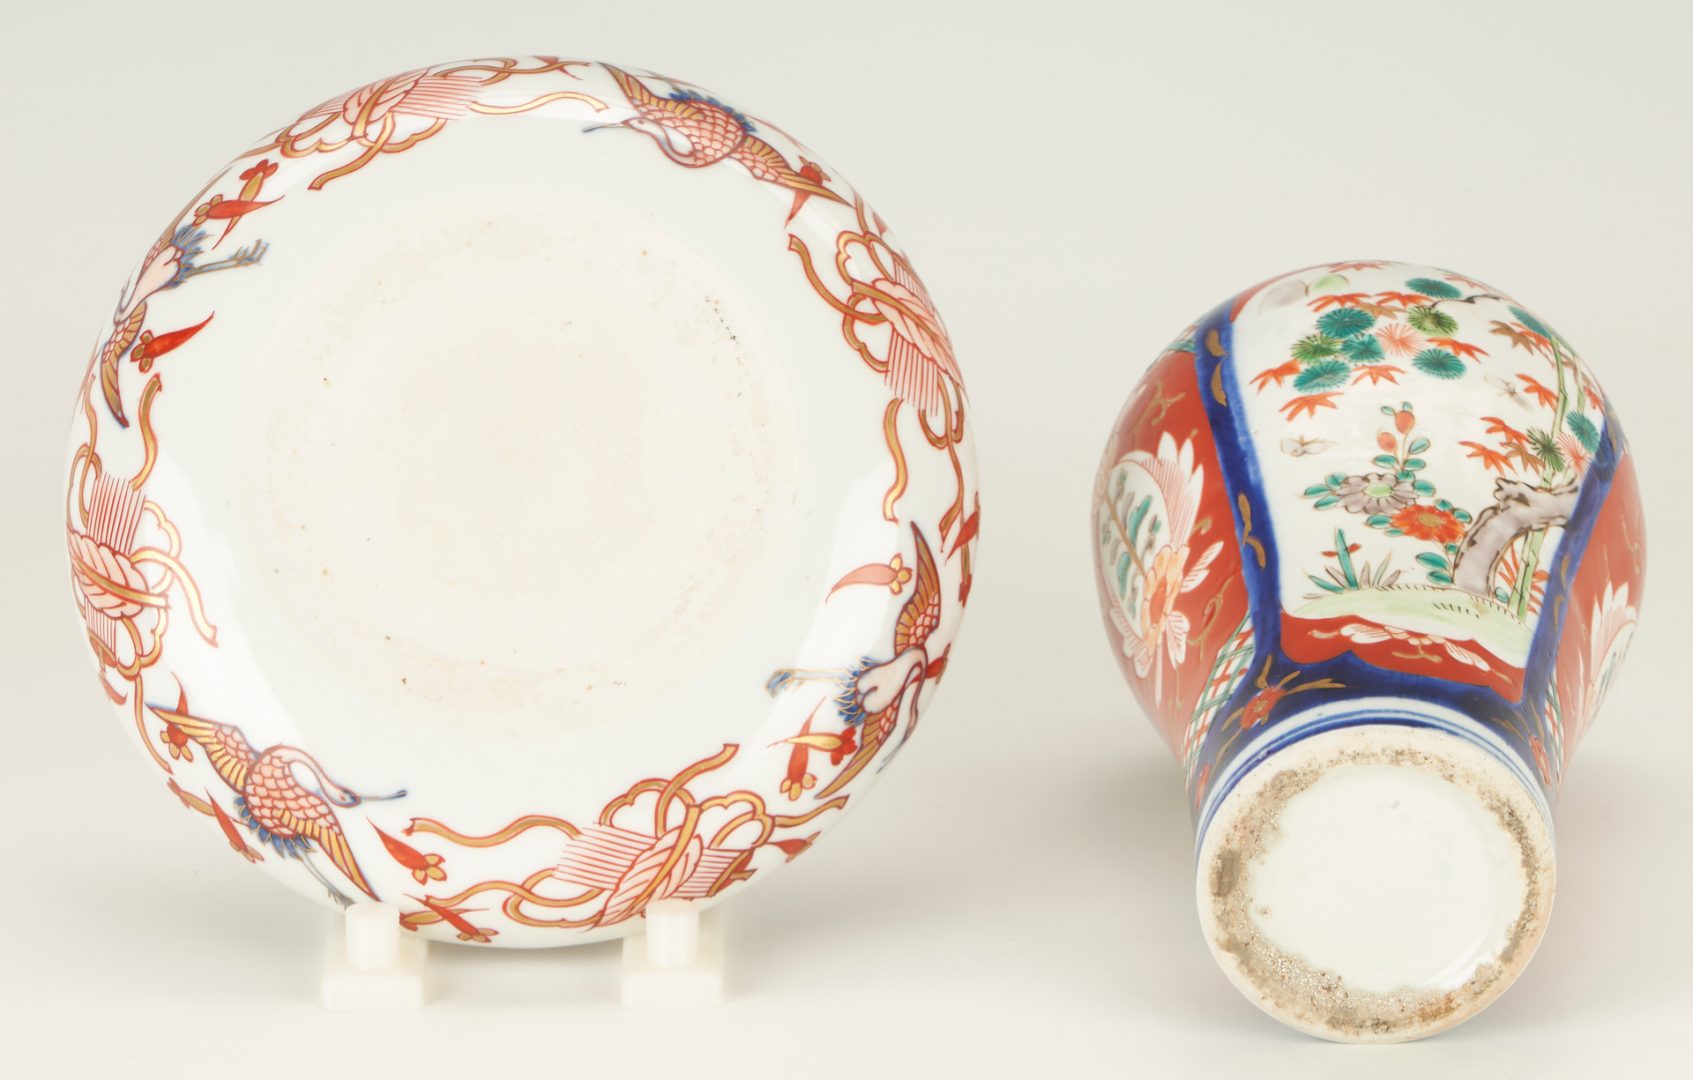 Lot 13: 21 Assorted Imari Porcelain Items incl. Charger